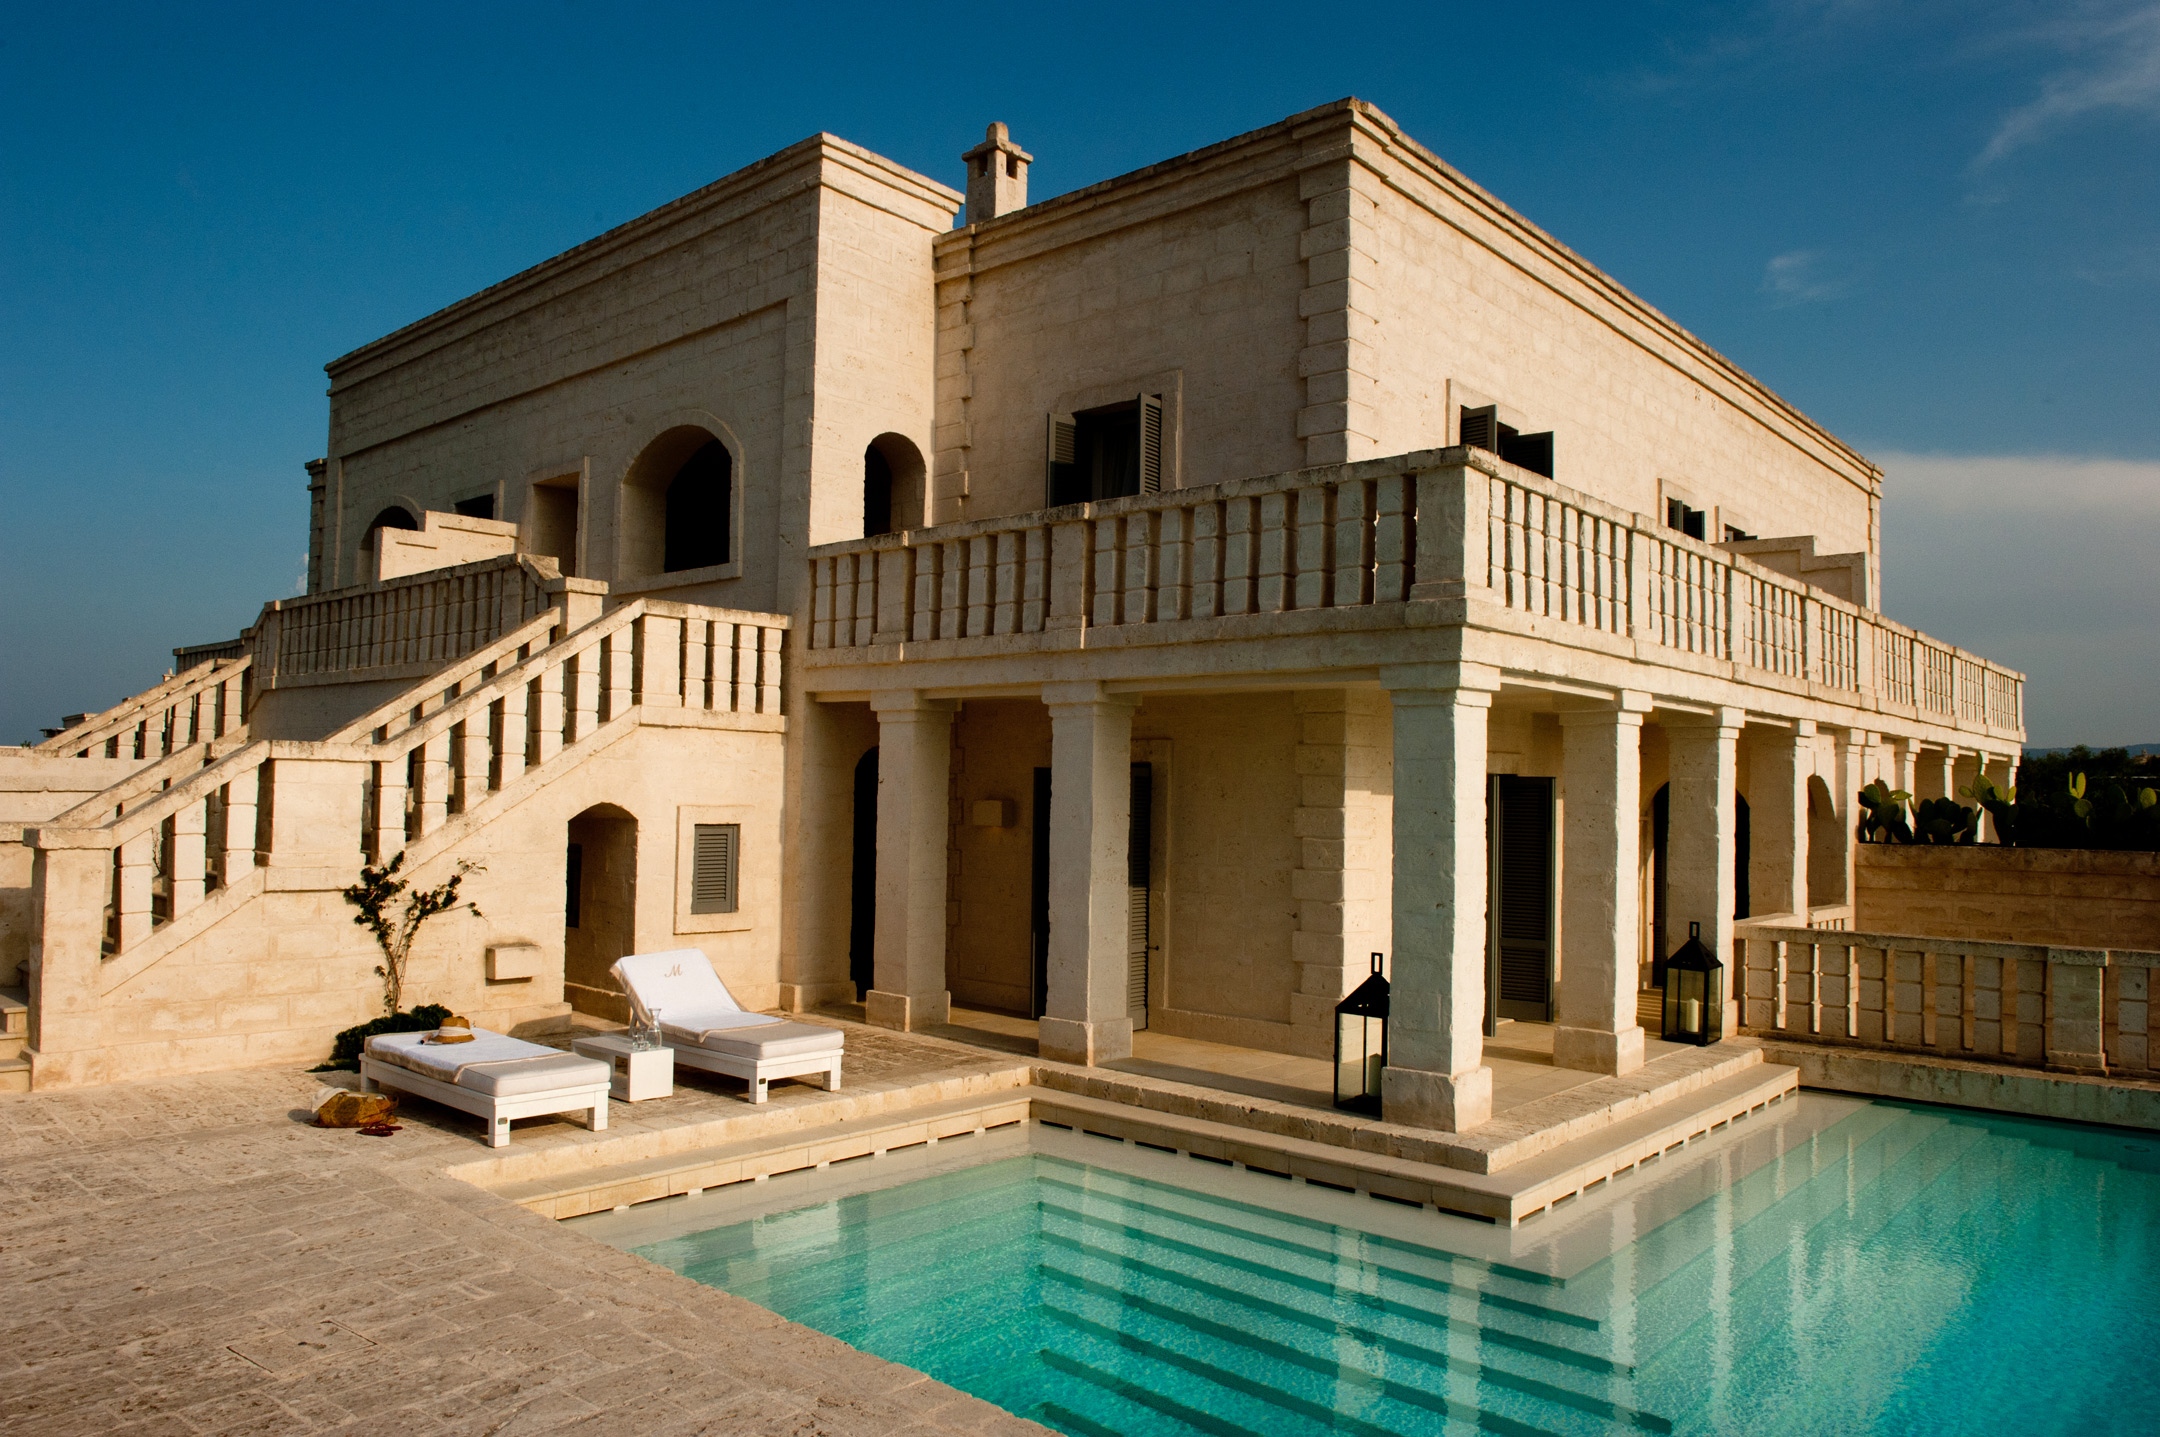 You’ll want to book these Puglia, Italy honeymoon hotels